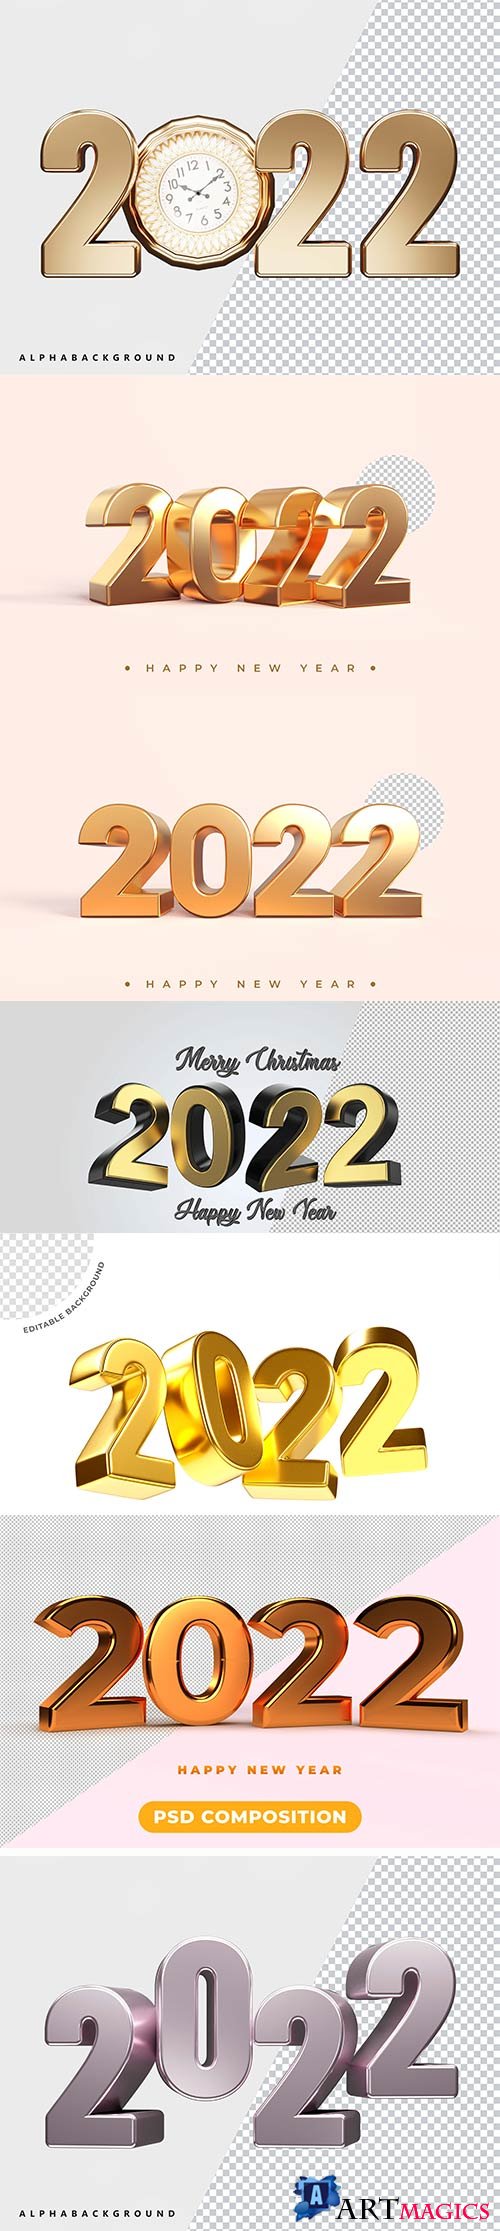 Psd Happy new year 2022 gold 3d rendering isolated on transparent background